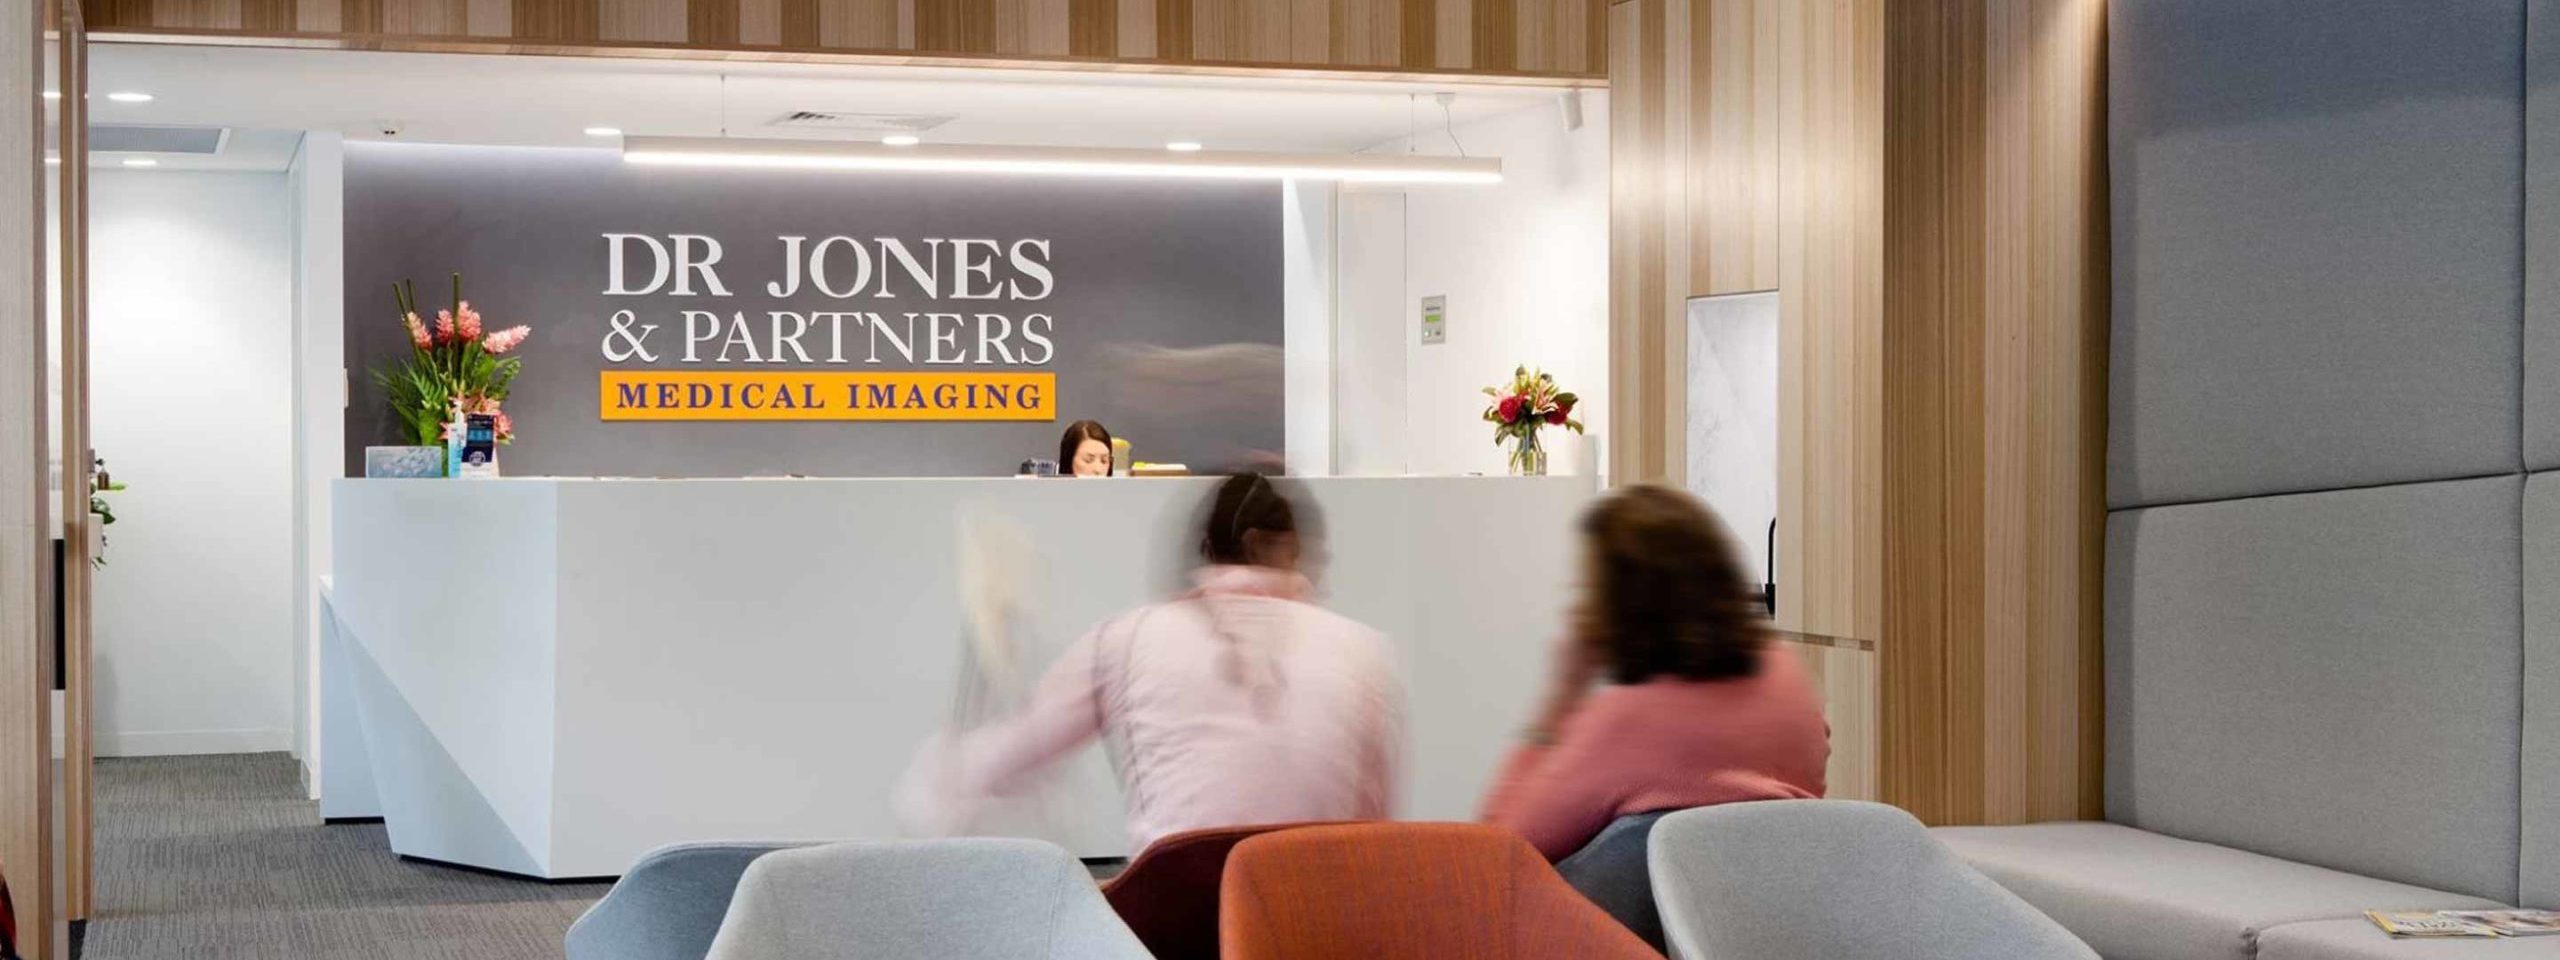 Jones Radiology clinic reception area with seated patients